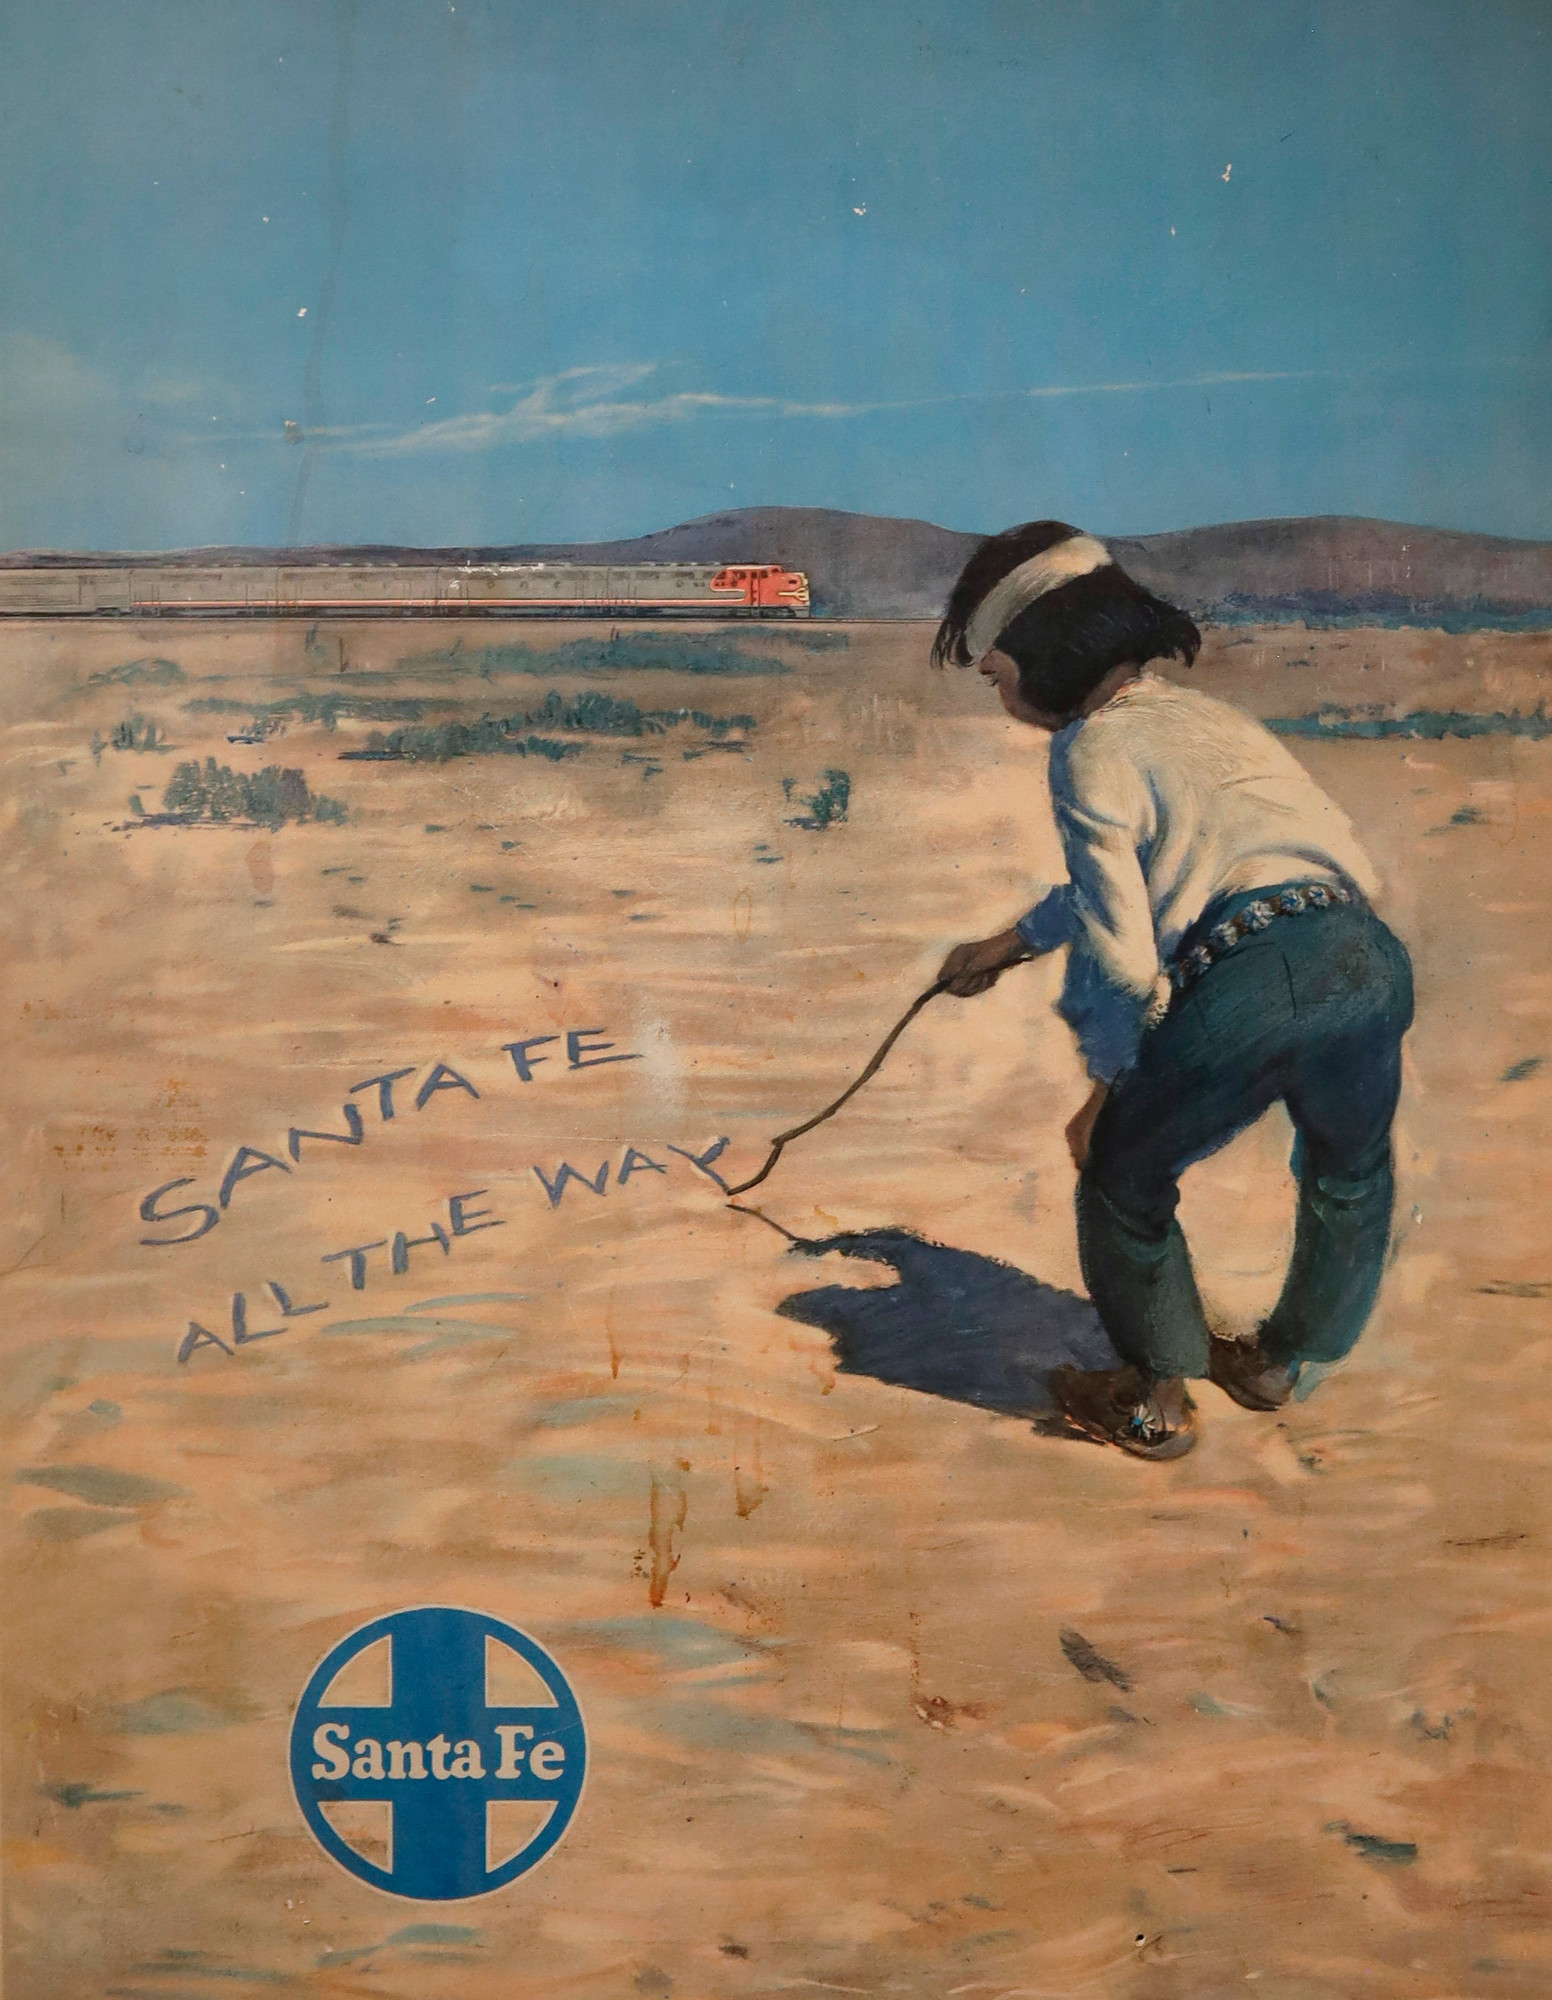 Santa Fe Railroad travel poster, reproduction c. 1946, is part of the "Selling the Southwest" exhibit at the Museum of Northern Arizona in Flagstaff.